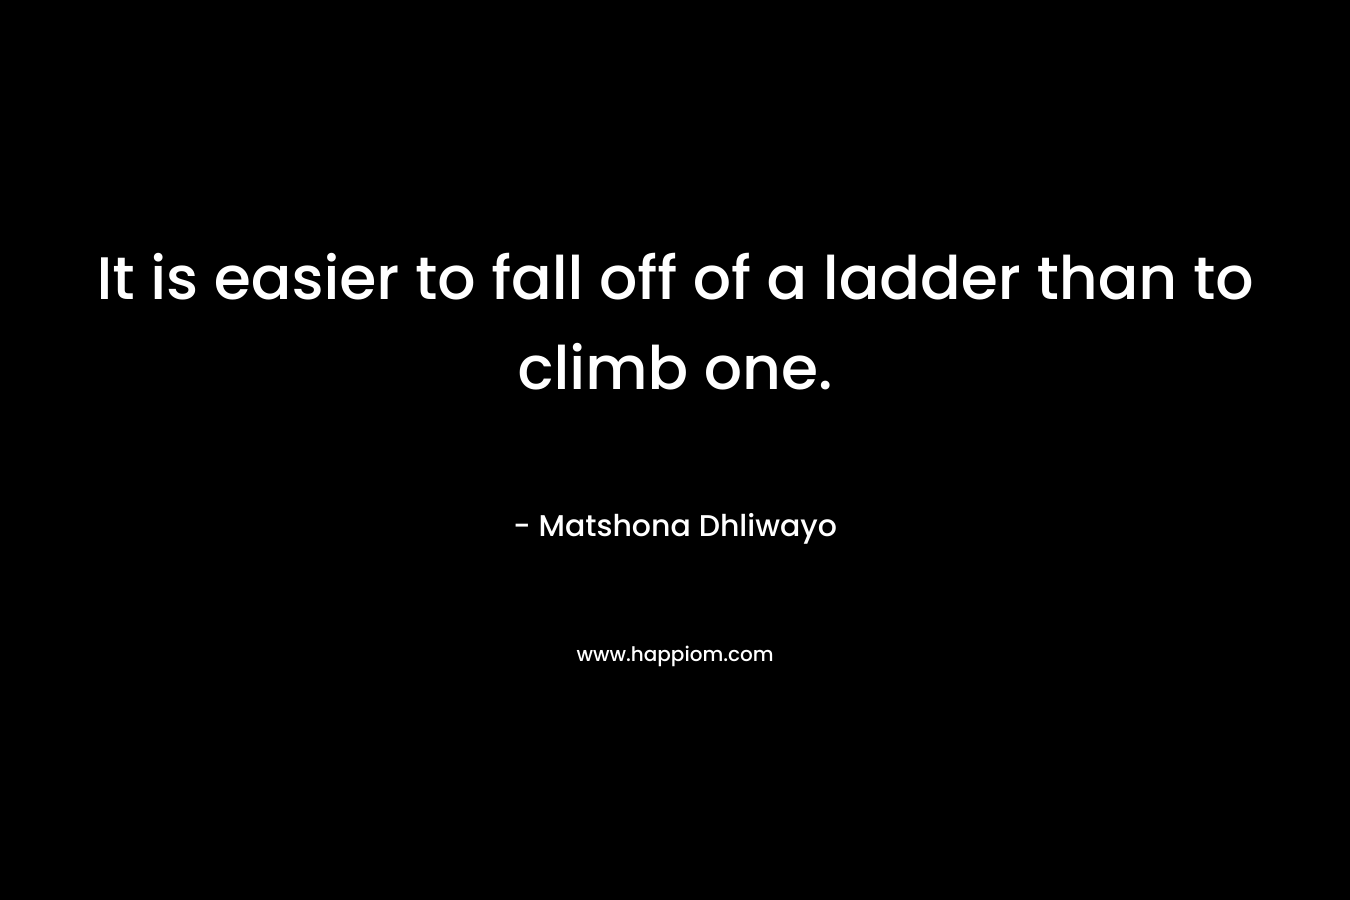 It is easier to fall off of a ladder than to climb one.